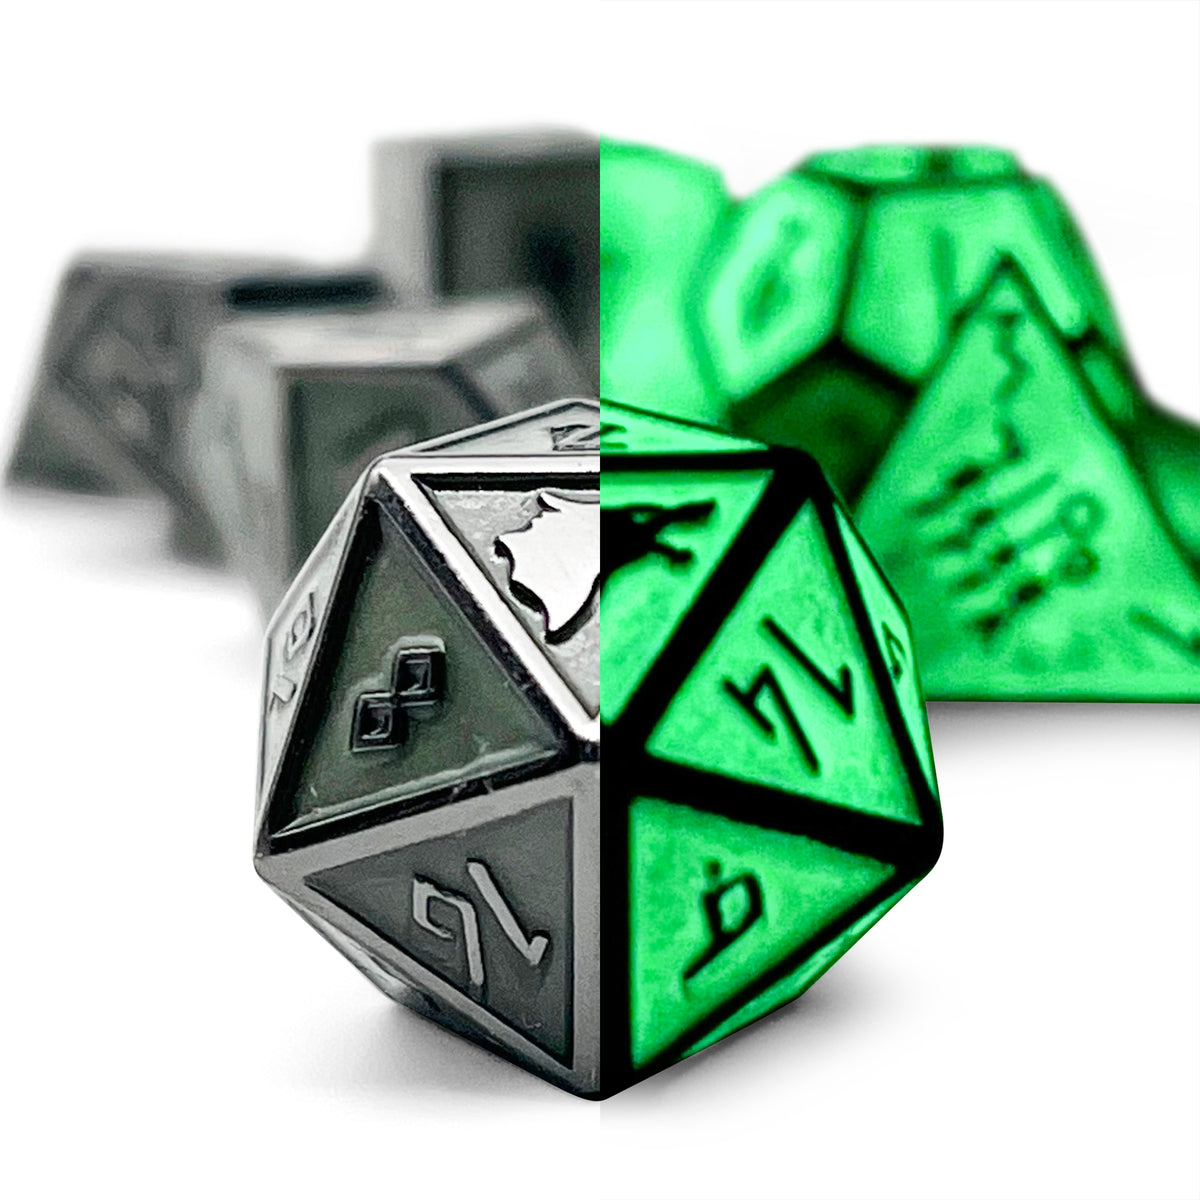 Green Slime Norse Themed Metal Dice Set